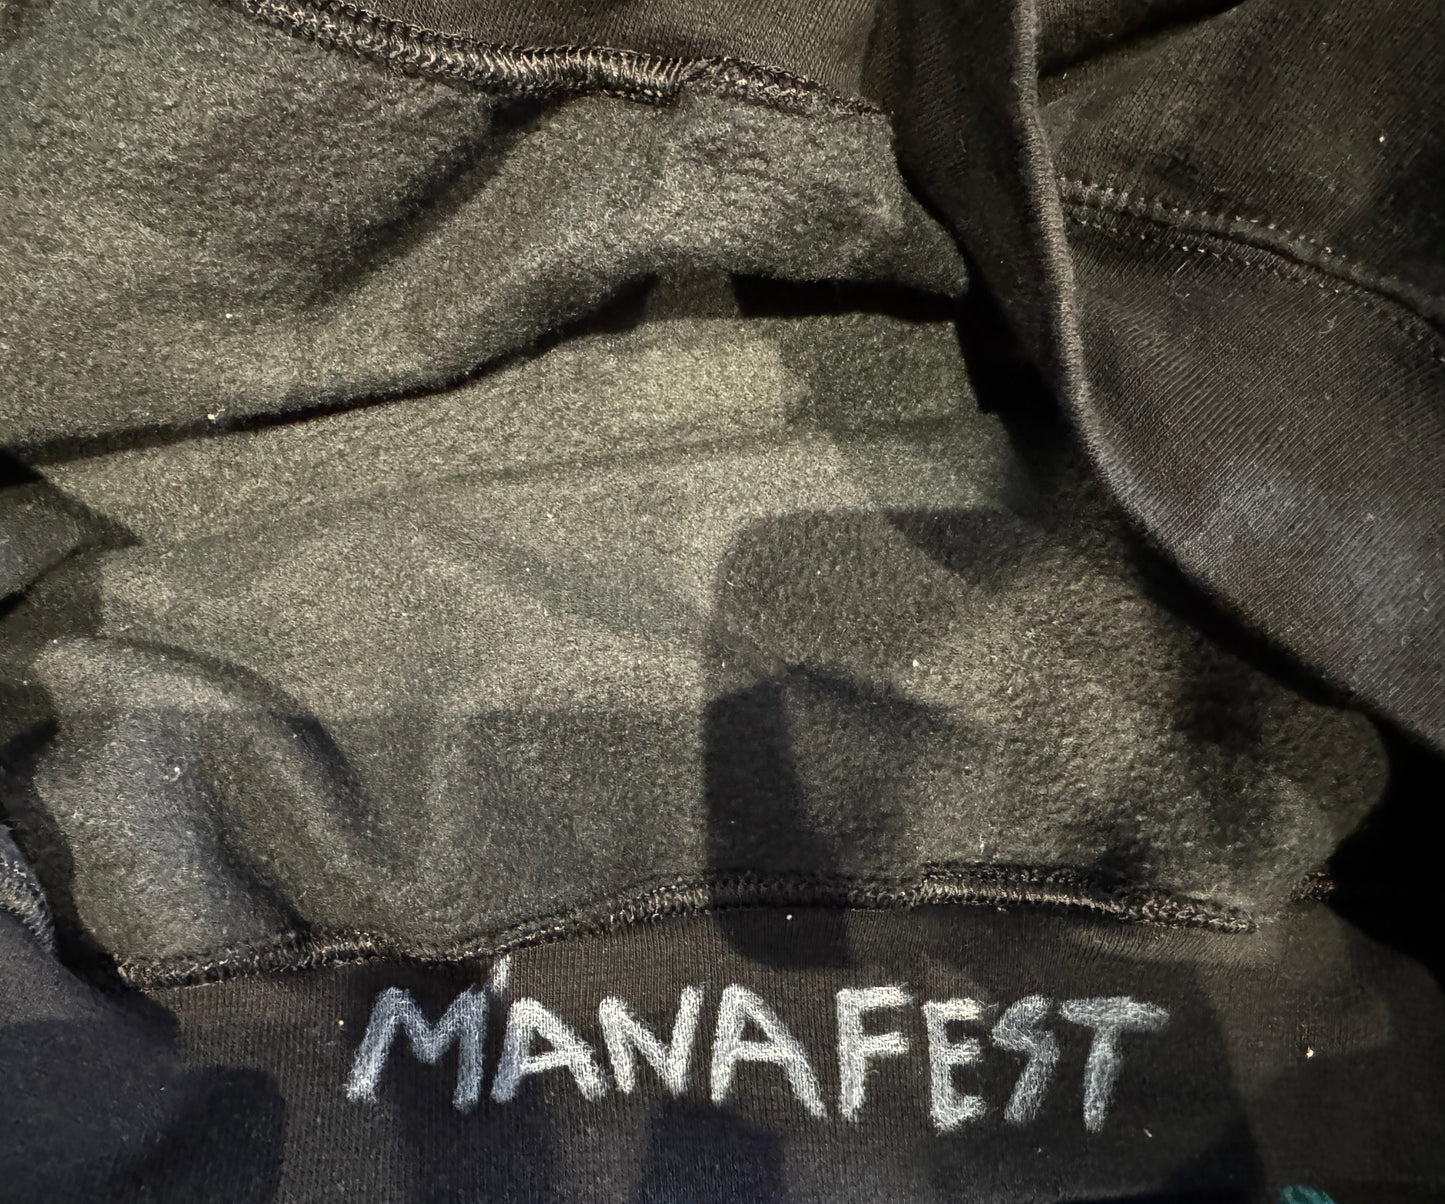 Autographed No Plan B Hoody XL 1 of 1 (Worn by Manafest)